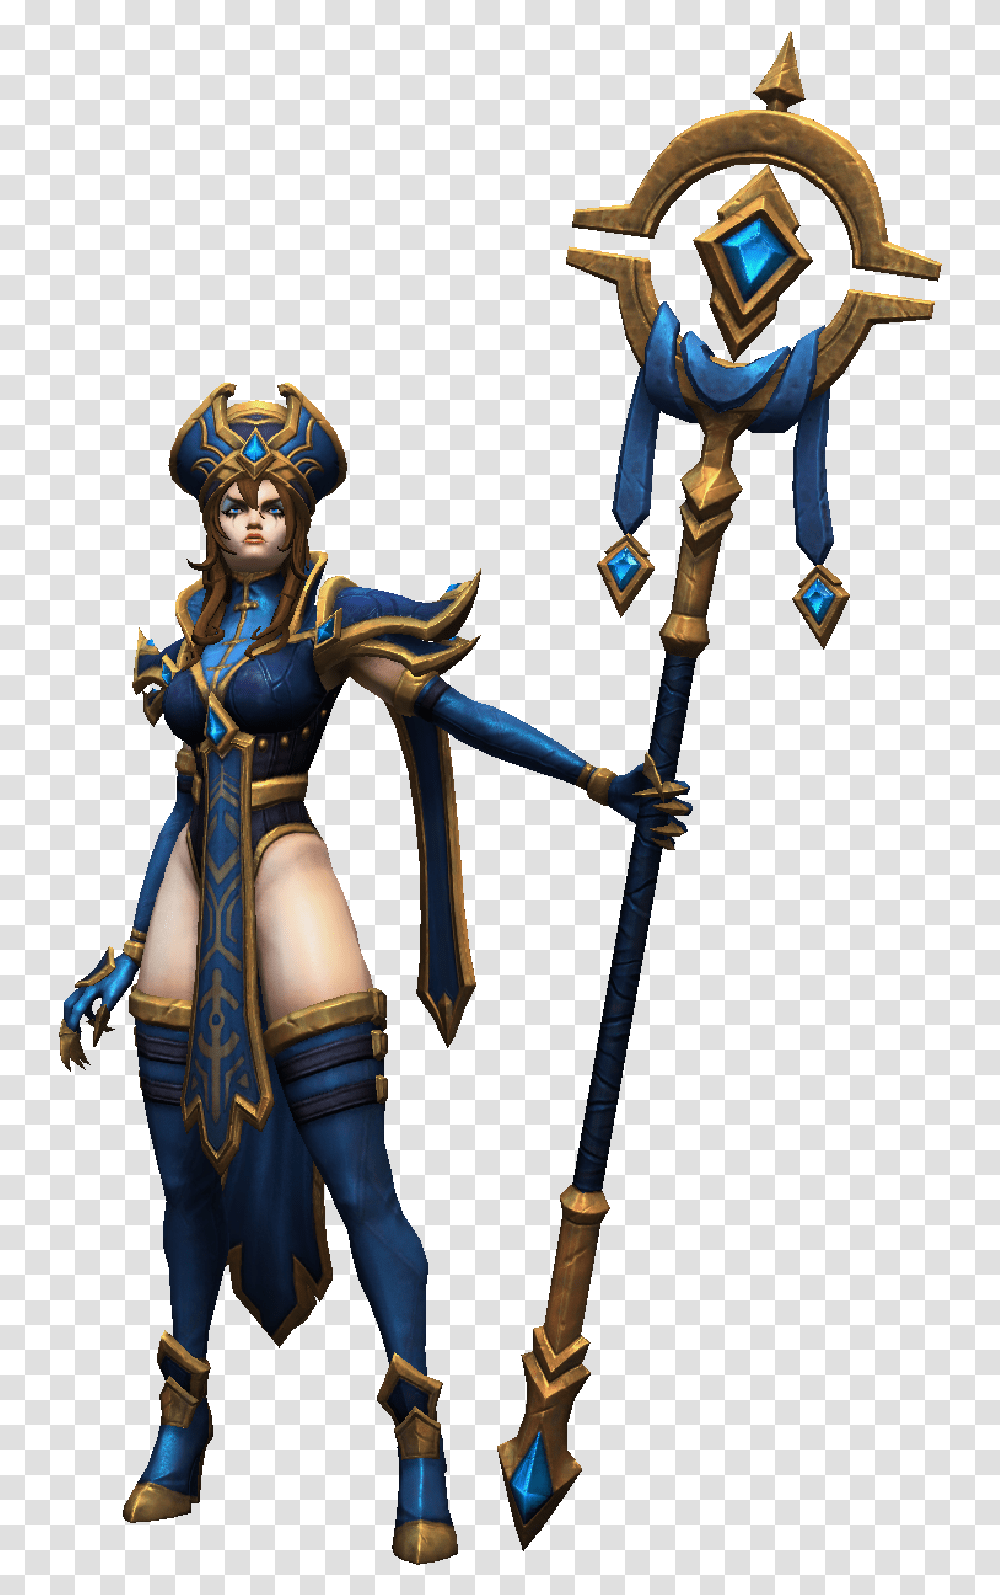 Whitemane Lordaeron Skin Heroes Of The Storm Whitemane, Person, Costume, Figurine Transparent Png